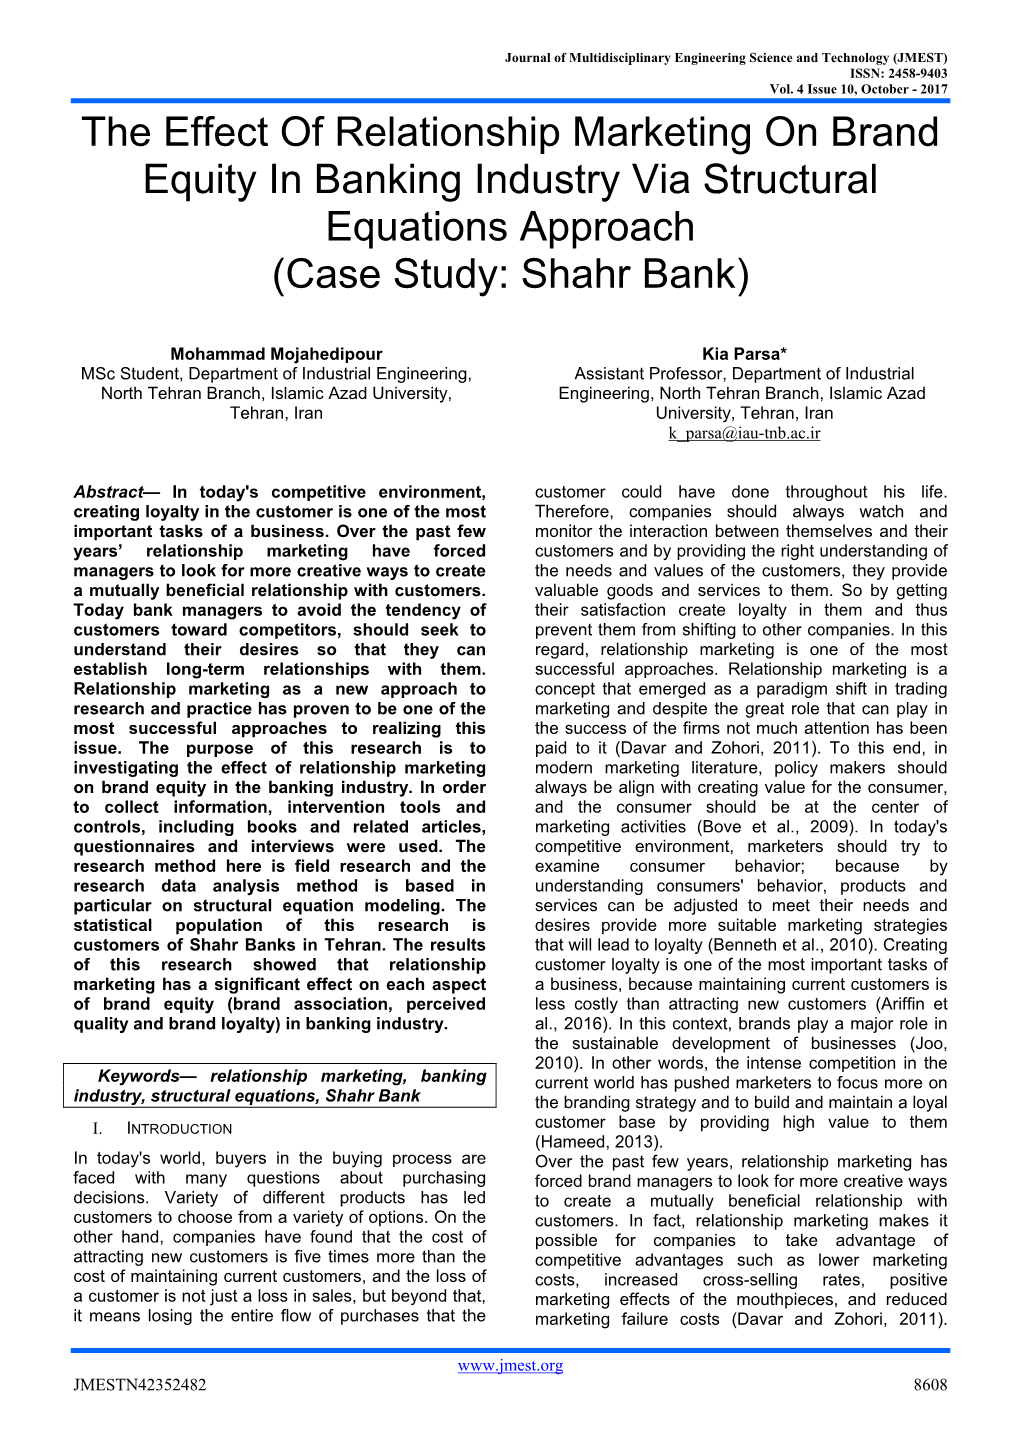 The Effect of Relationship Marketing on Brand Equity in Banking Industry Via Structural Equations Approach (Case Study: Shahr Bank)